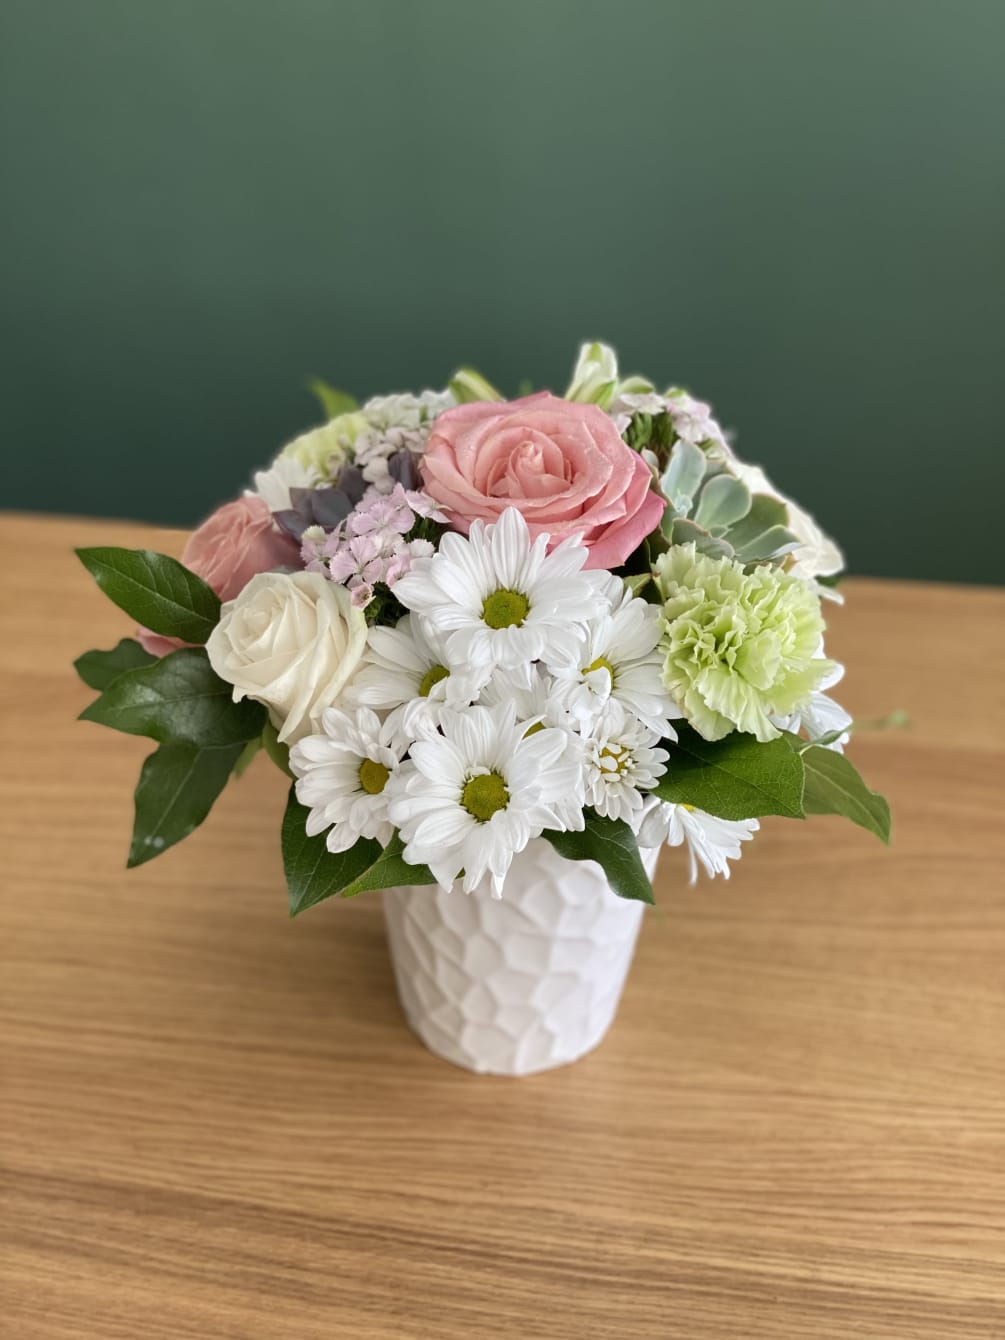 Lovely arrangement for that special someone filled with daisies, roses, succulents and